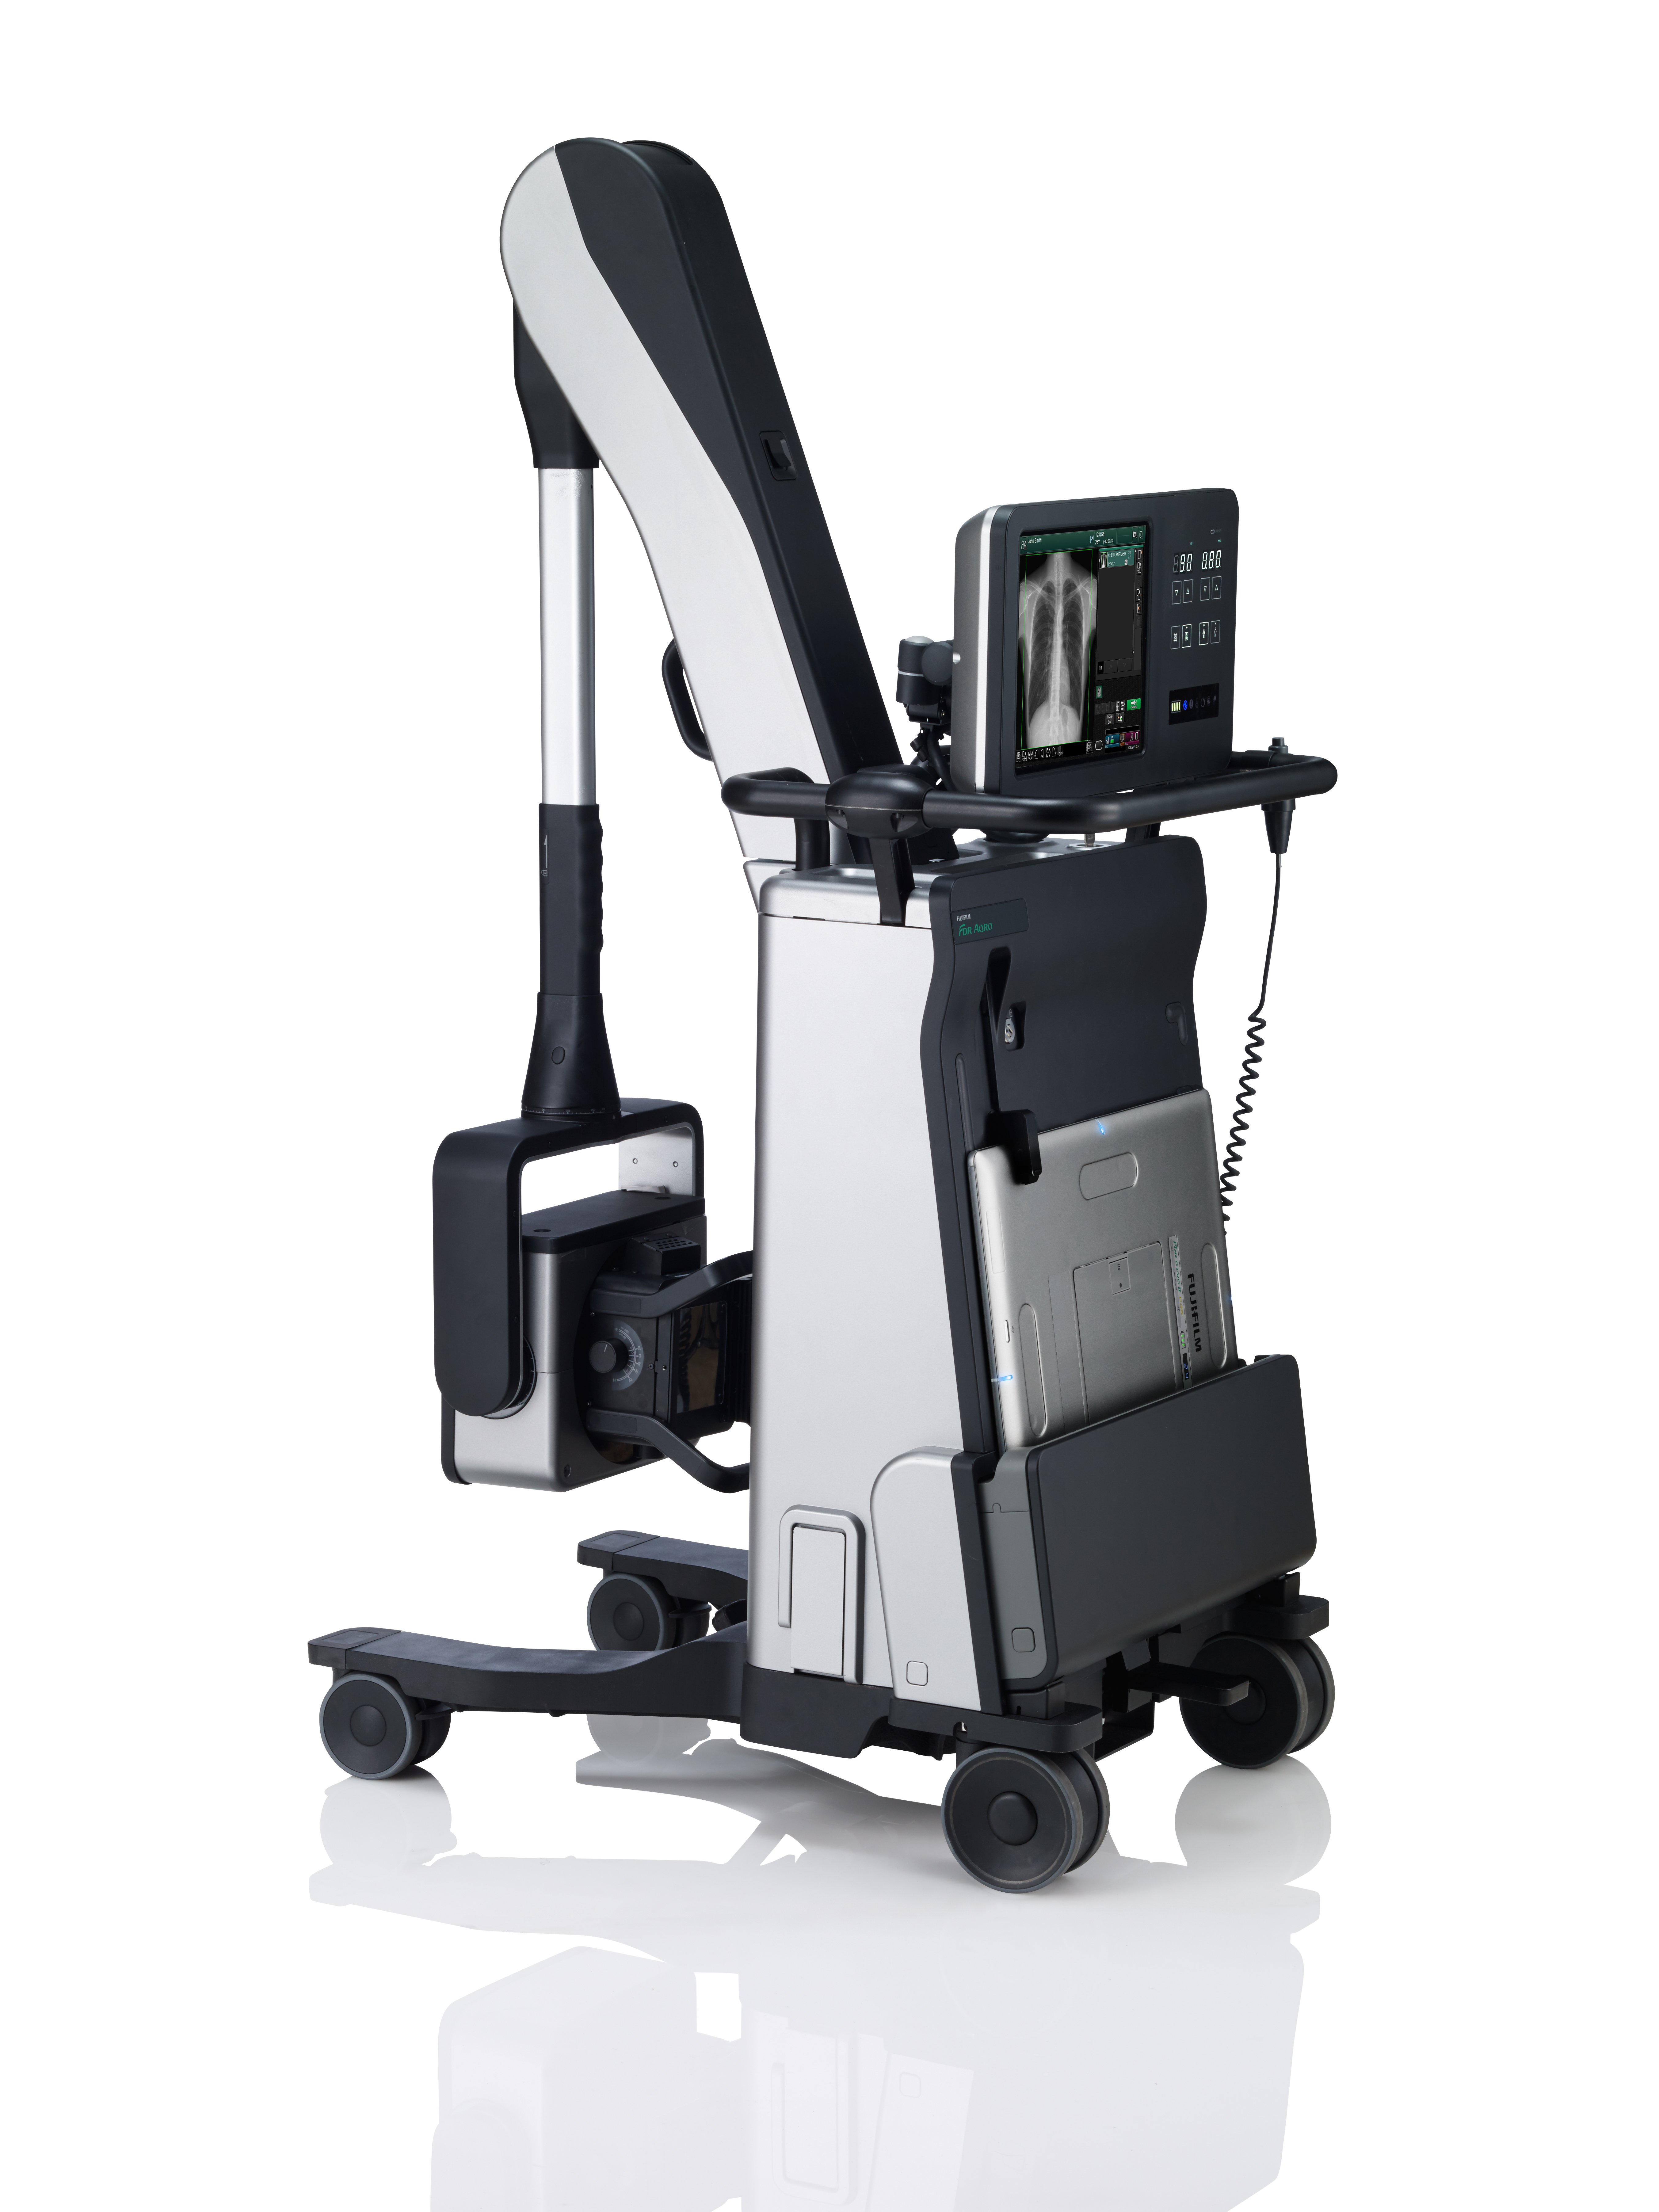 The FDR AQRO is a compact mobile digital X-ray system